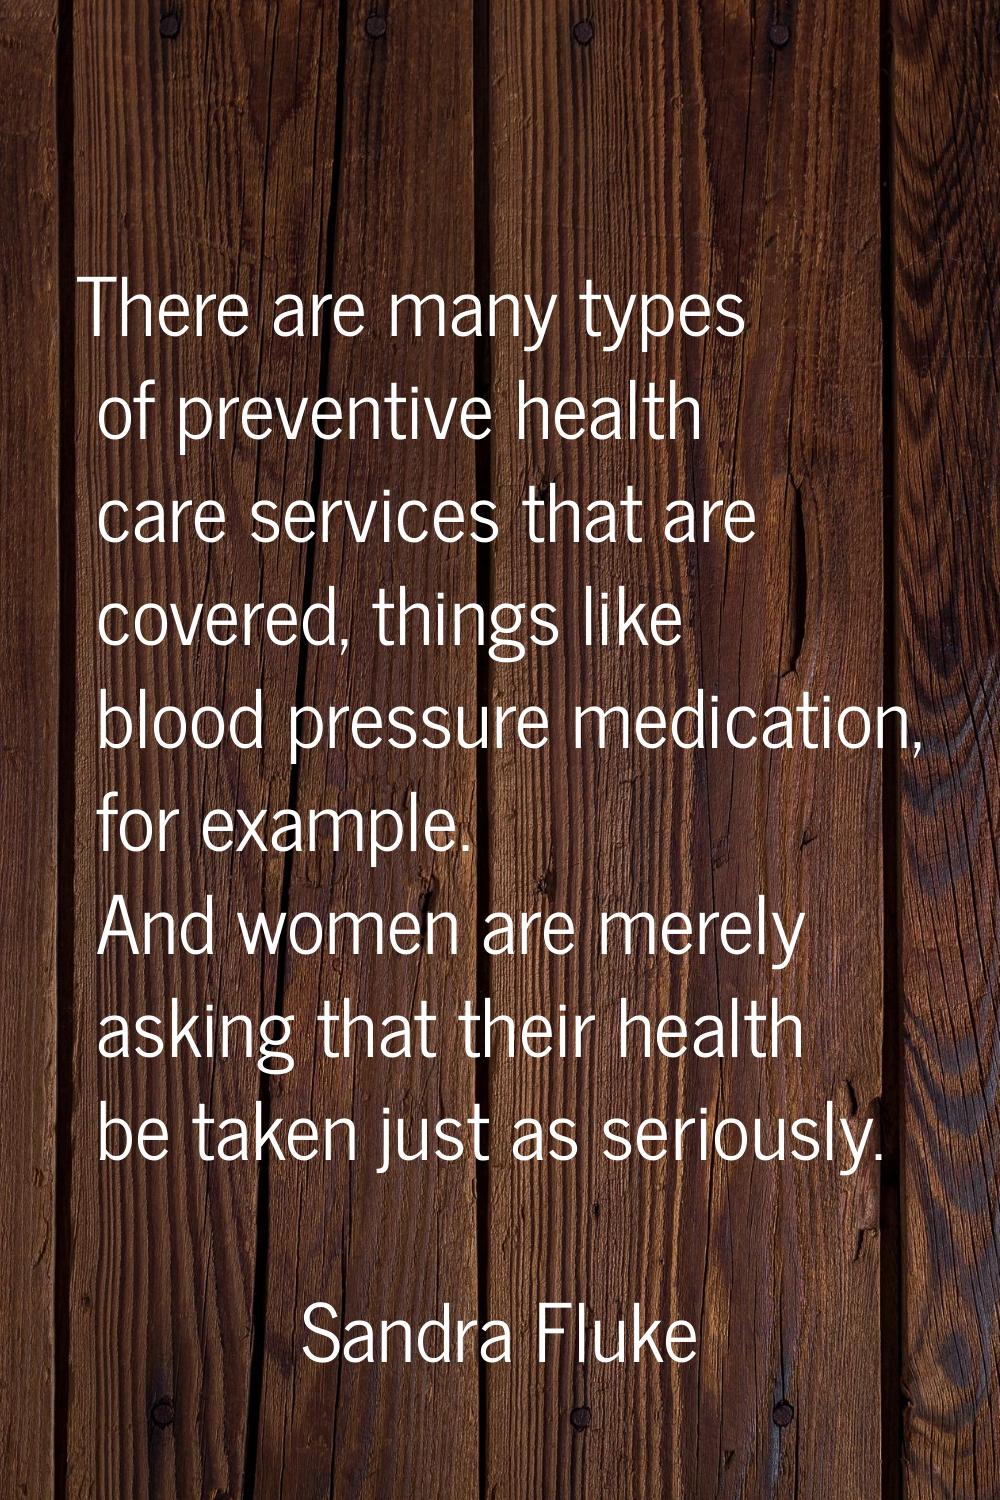 There are many types of preventive health care services that are covered, things like blood pressur